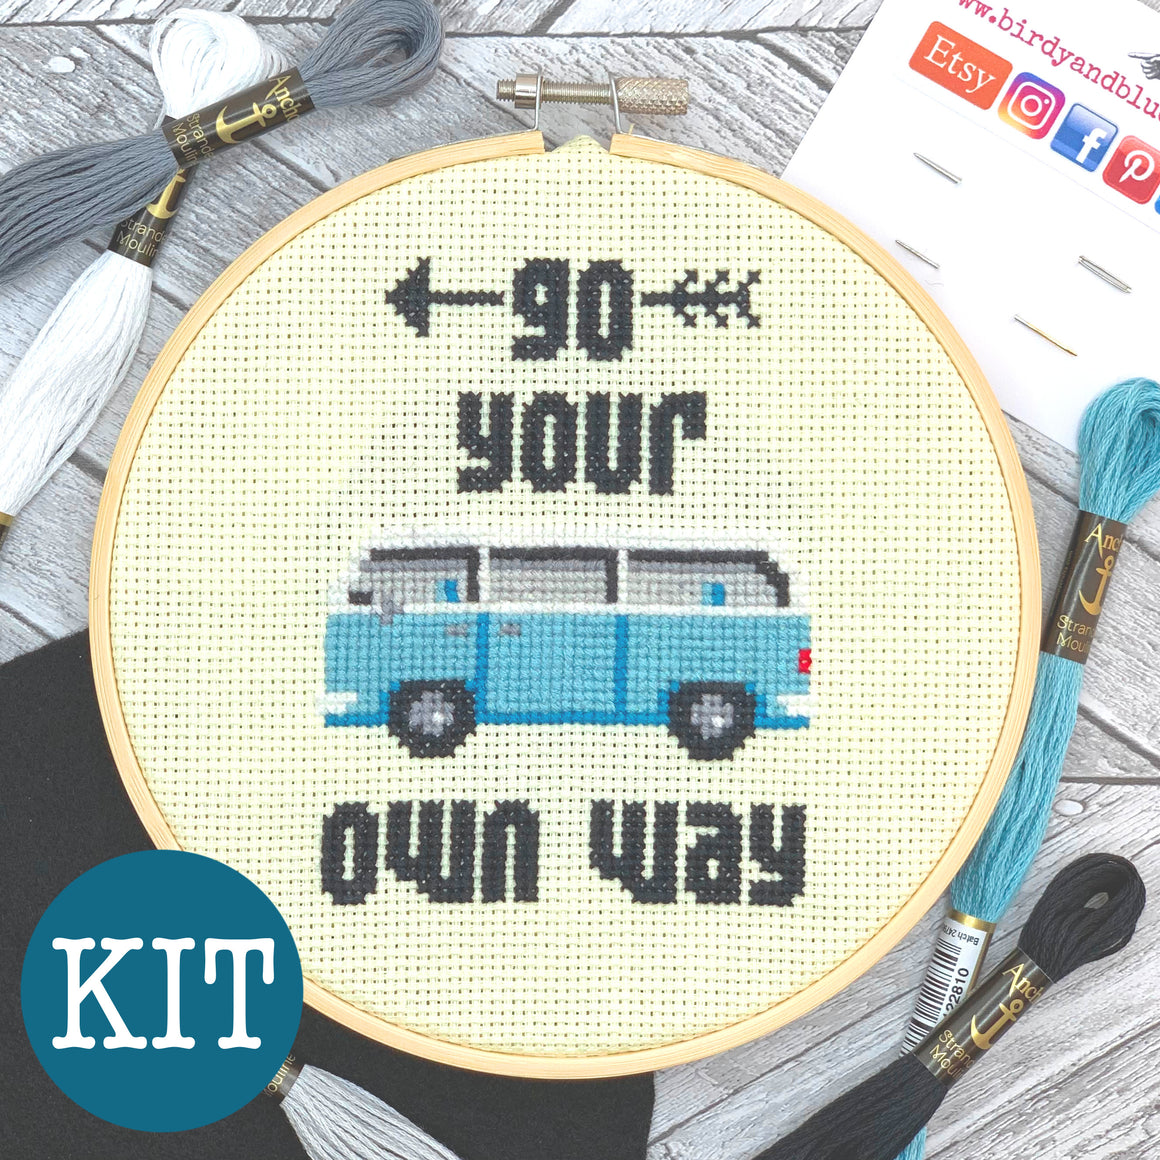 CROSS STITCH KIT - Go Your Own Way (complete kit including 6" hoop)